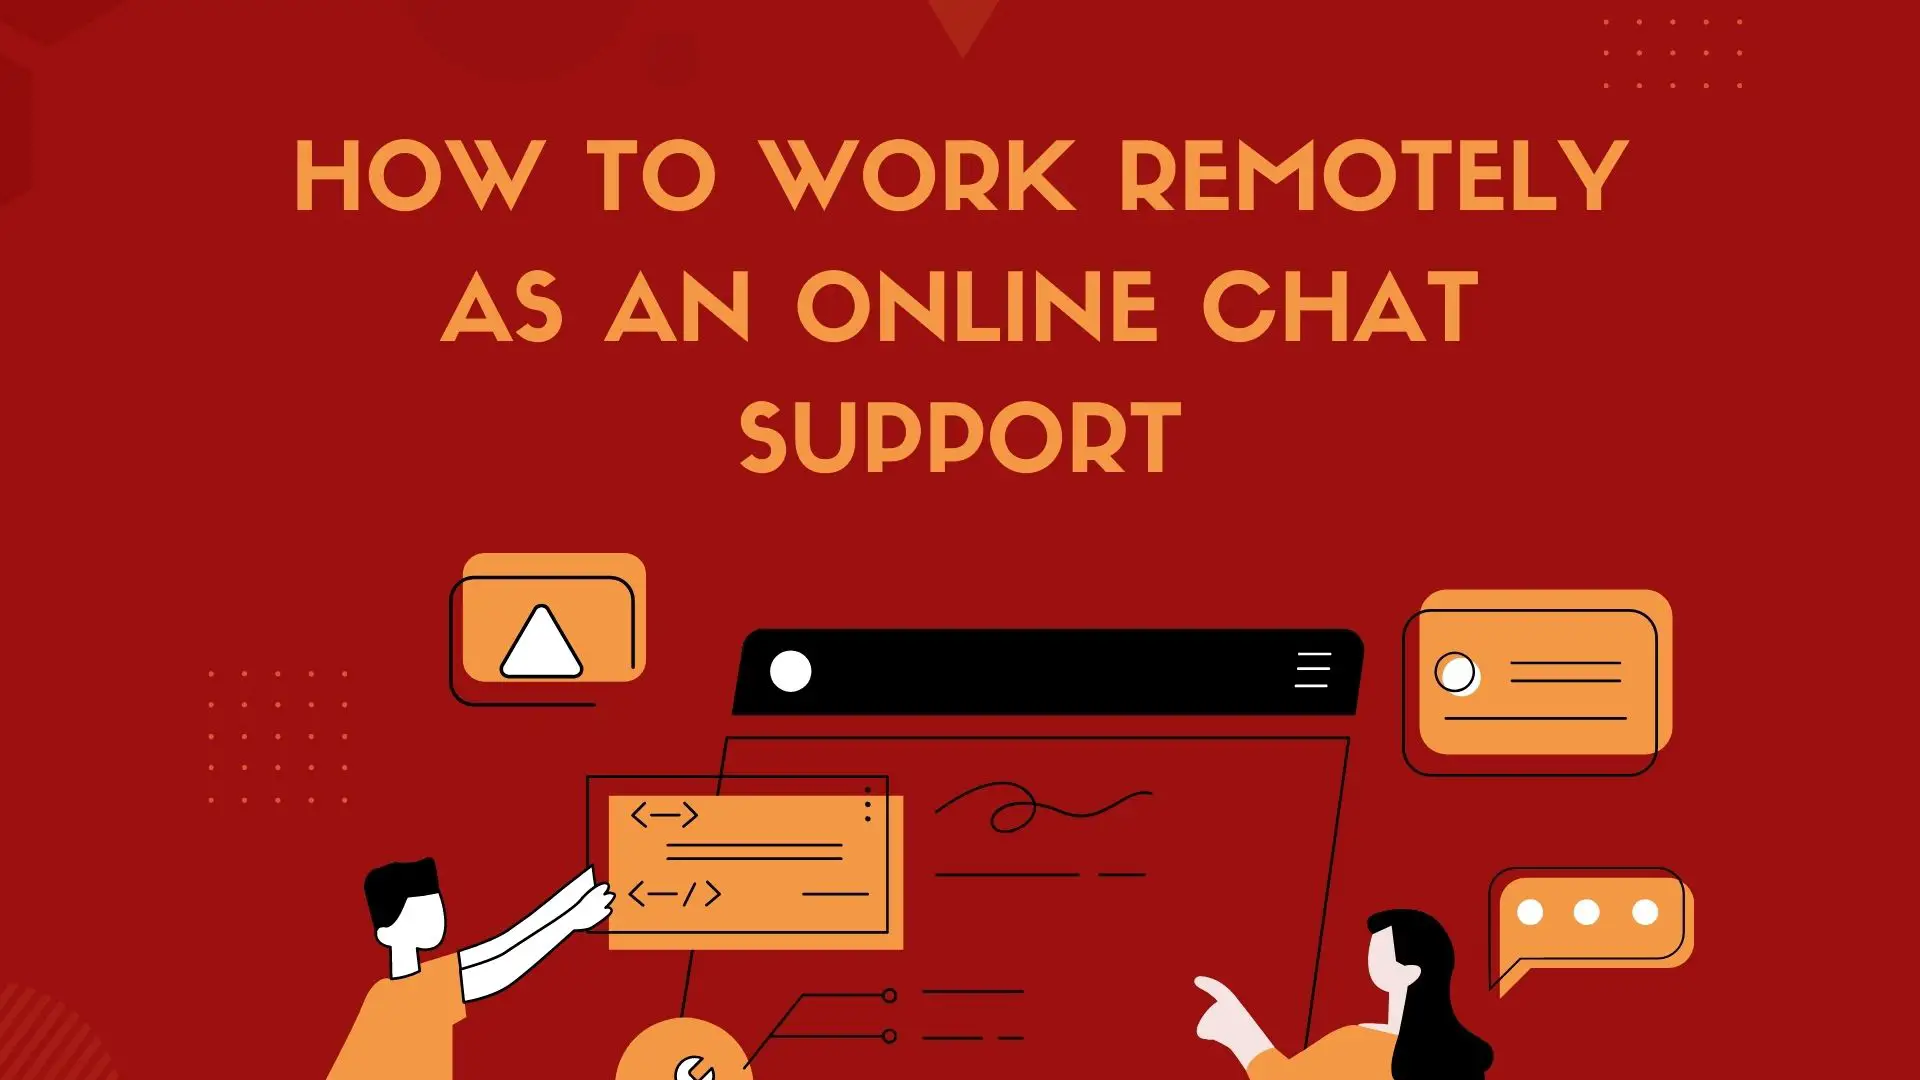 How To Work Remotely As An Online Chat Support